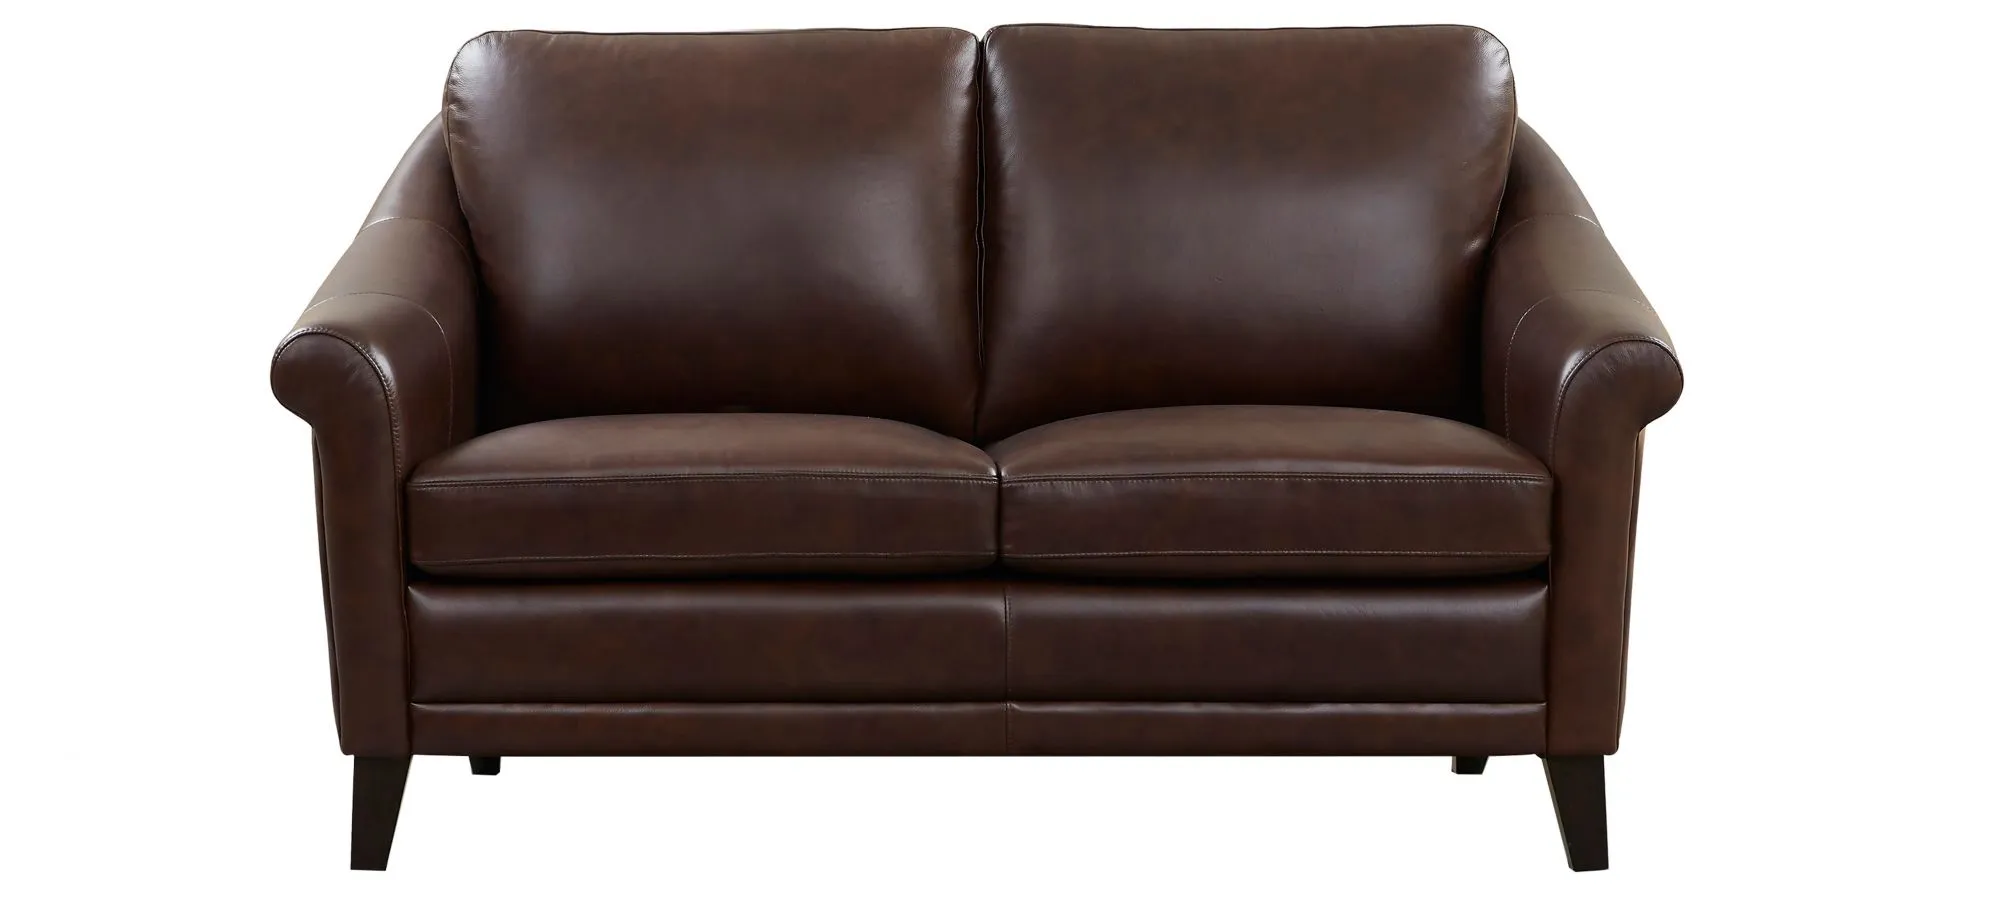 Soler Loveseat in Brown by GTR Leather Inc